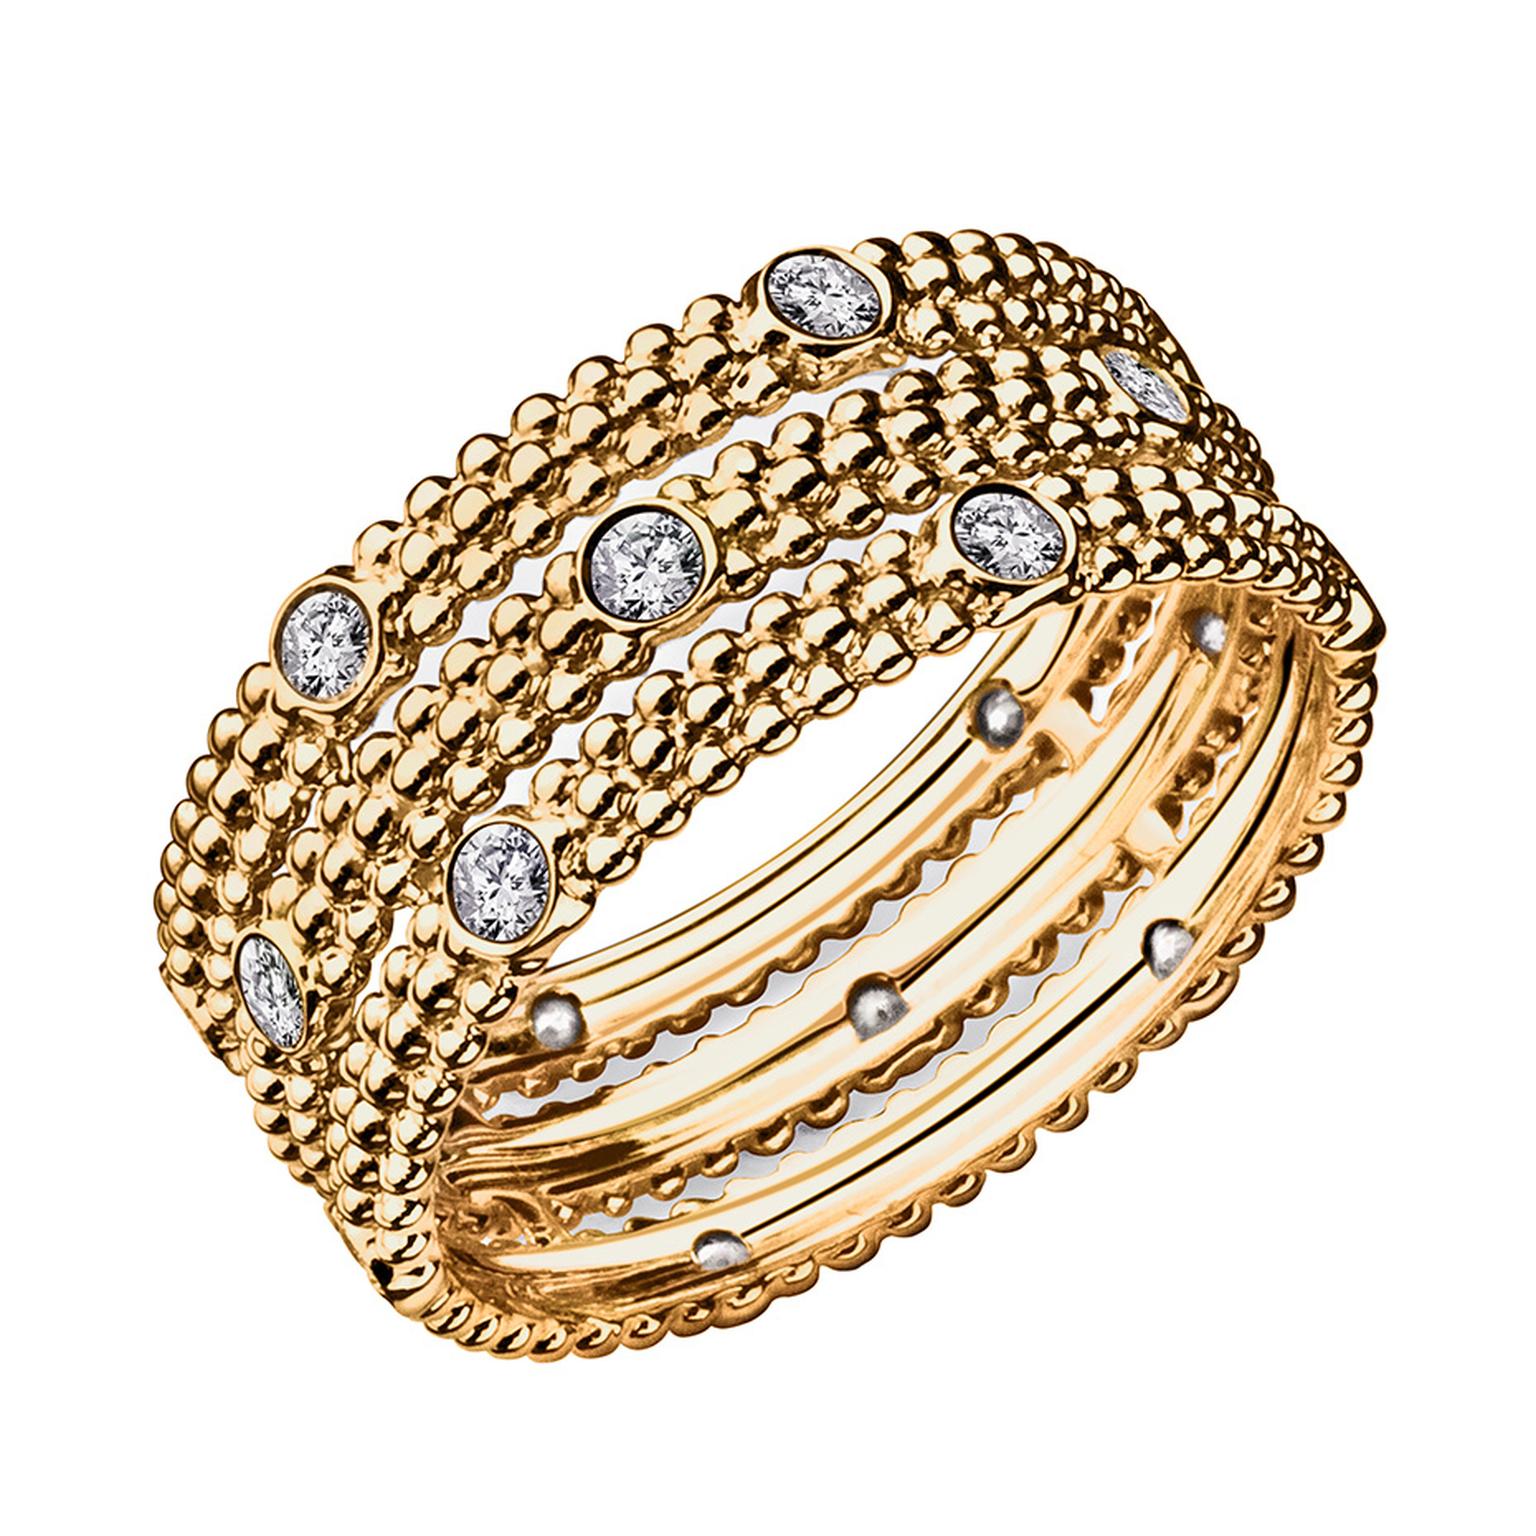 Mauboussin's Le Premier Jour ring in yellow gold features six diamonds ($1,400).